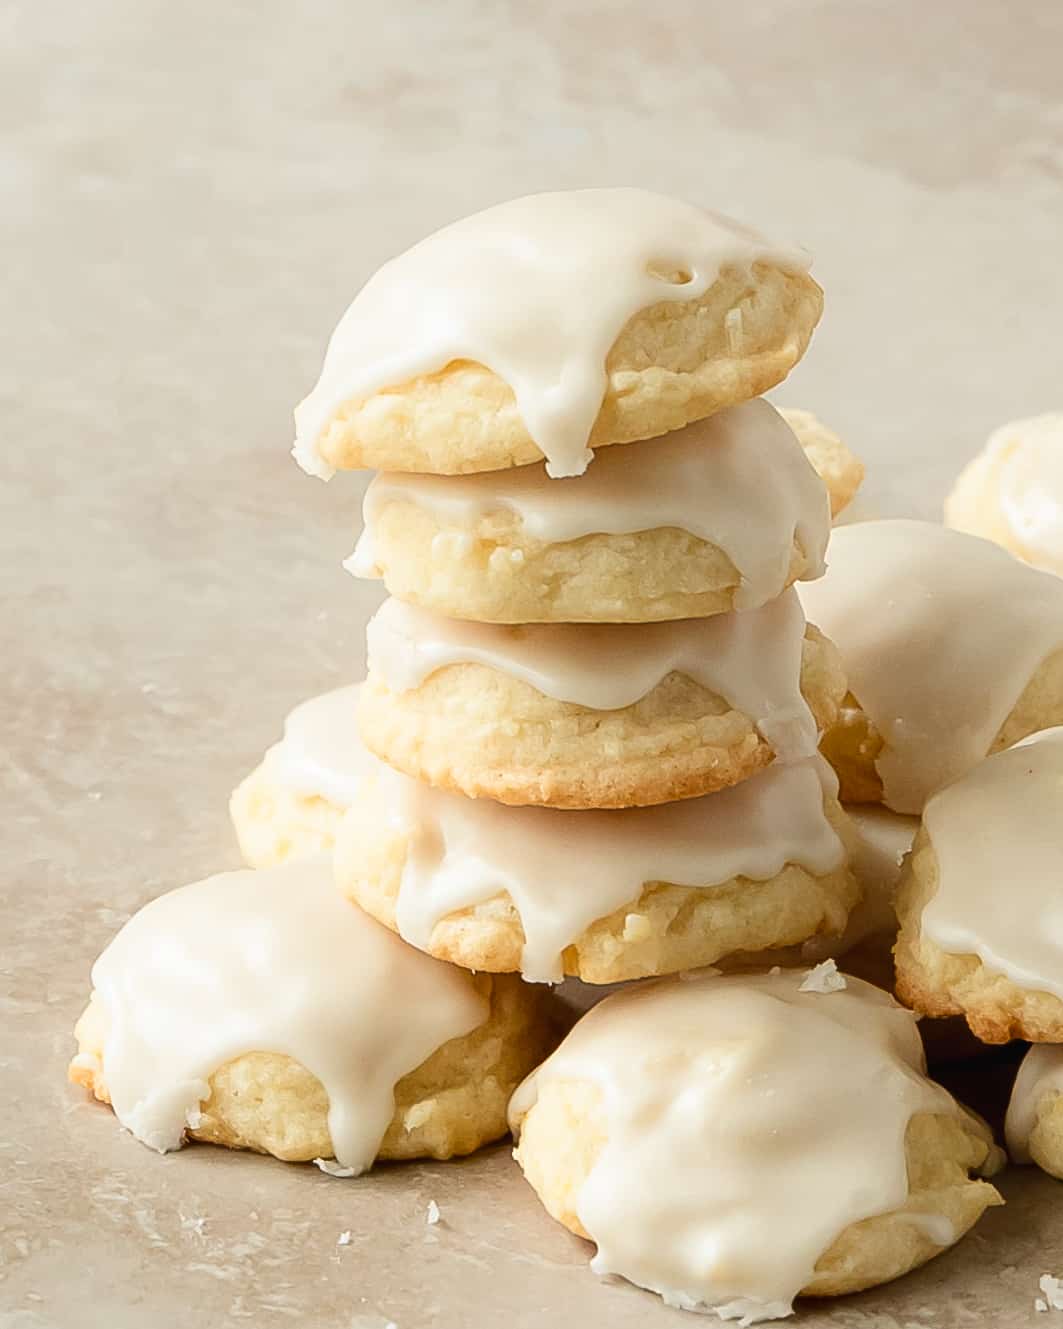 Lemon drop cookies are soft and buttery cookies filled with bright and fresh lemon flavor. Enjoy these bite sized Italian lemon cookies plain or with a sweet and tart lemon glaze. Make these wonderfully refreshing and beautifully fragrant glazed lemon cookies for a taste of spring and summer all year long. 